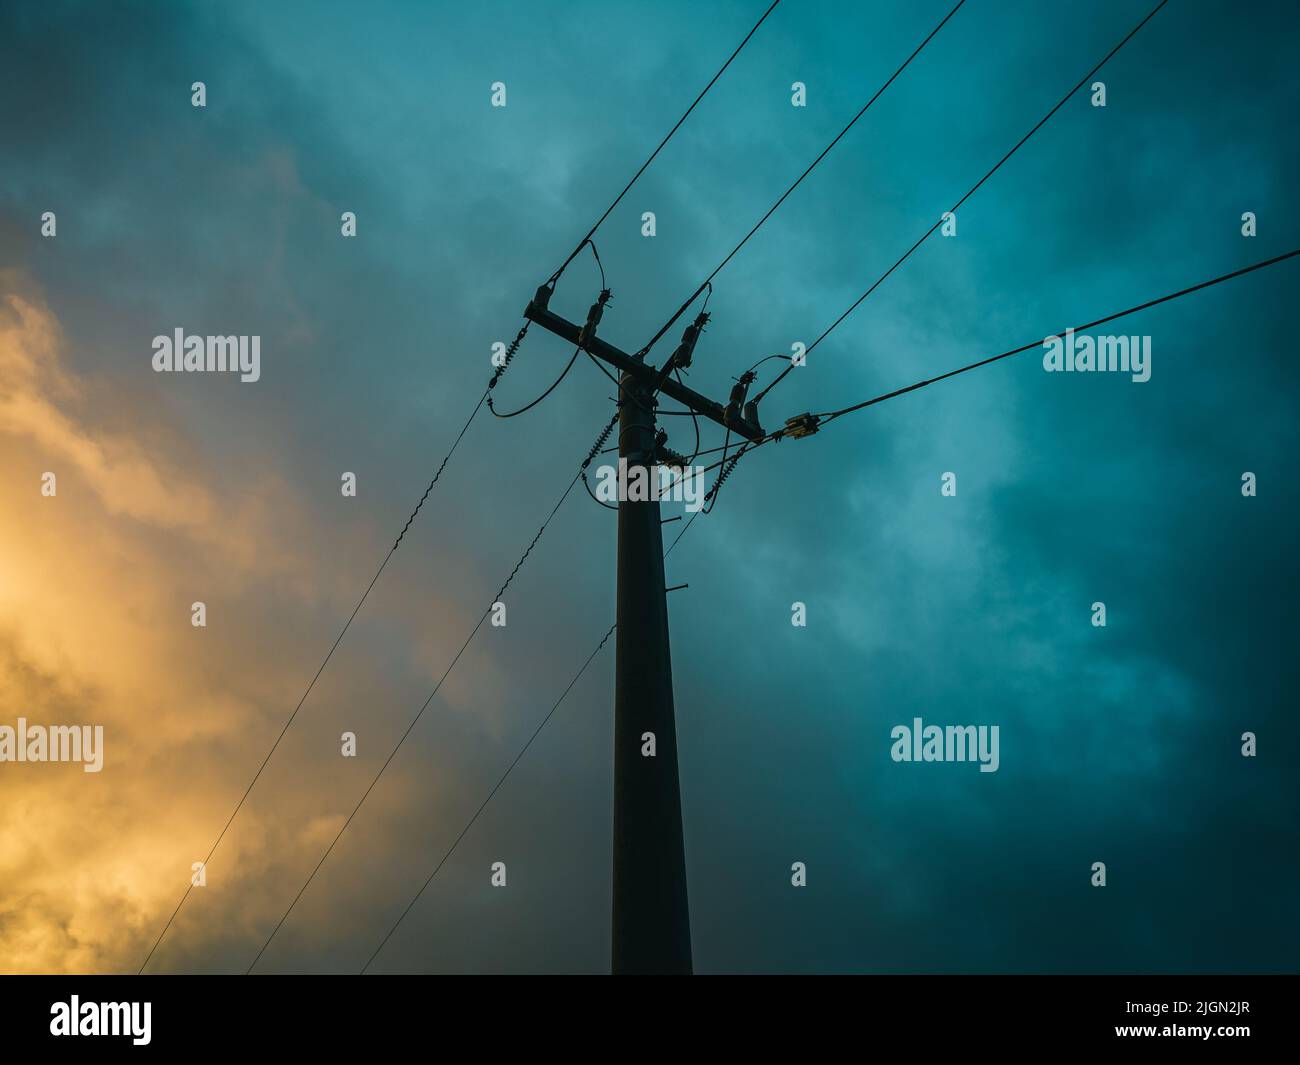 Electrical powerlines with cloudy sky backdrop Stock Photo